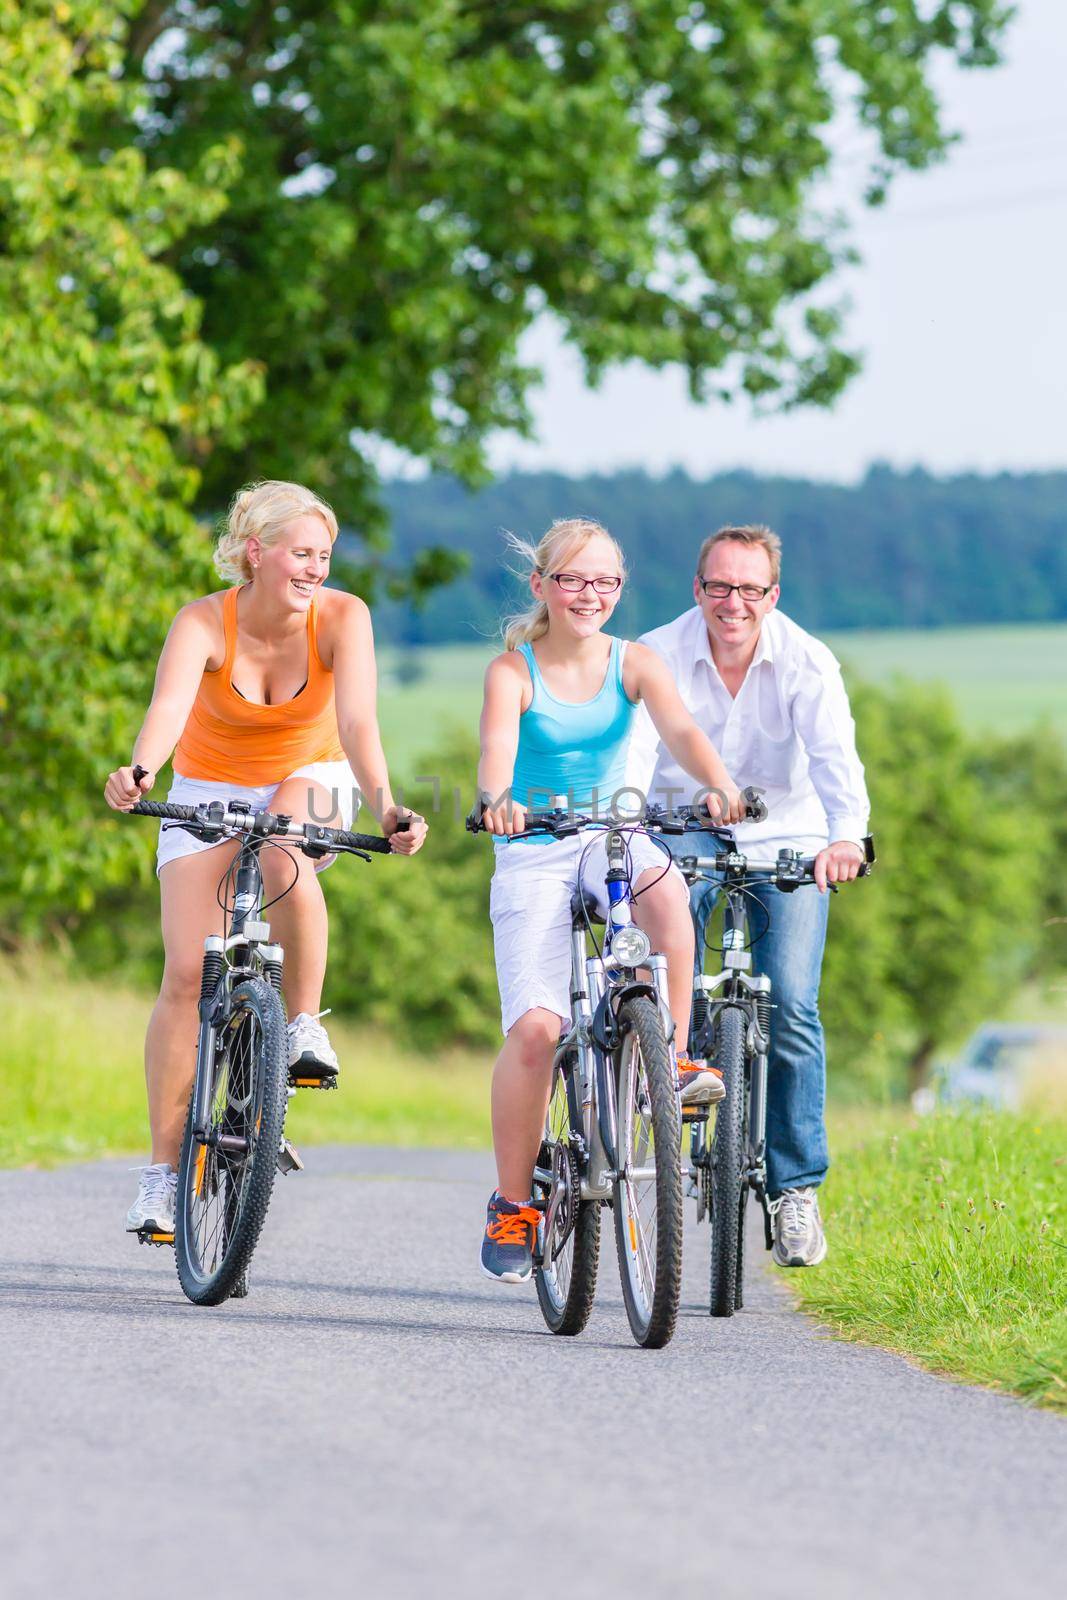 Parents and daughter have bicycle or bike tour on country lane